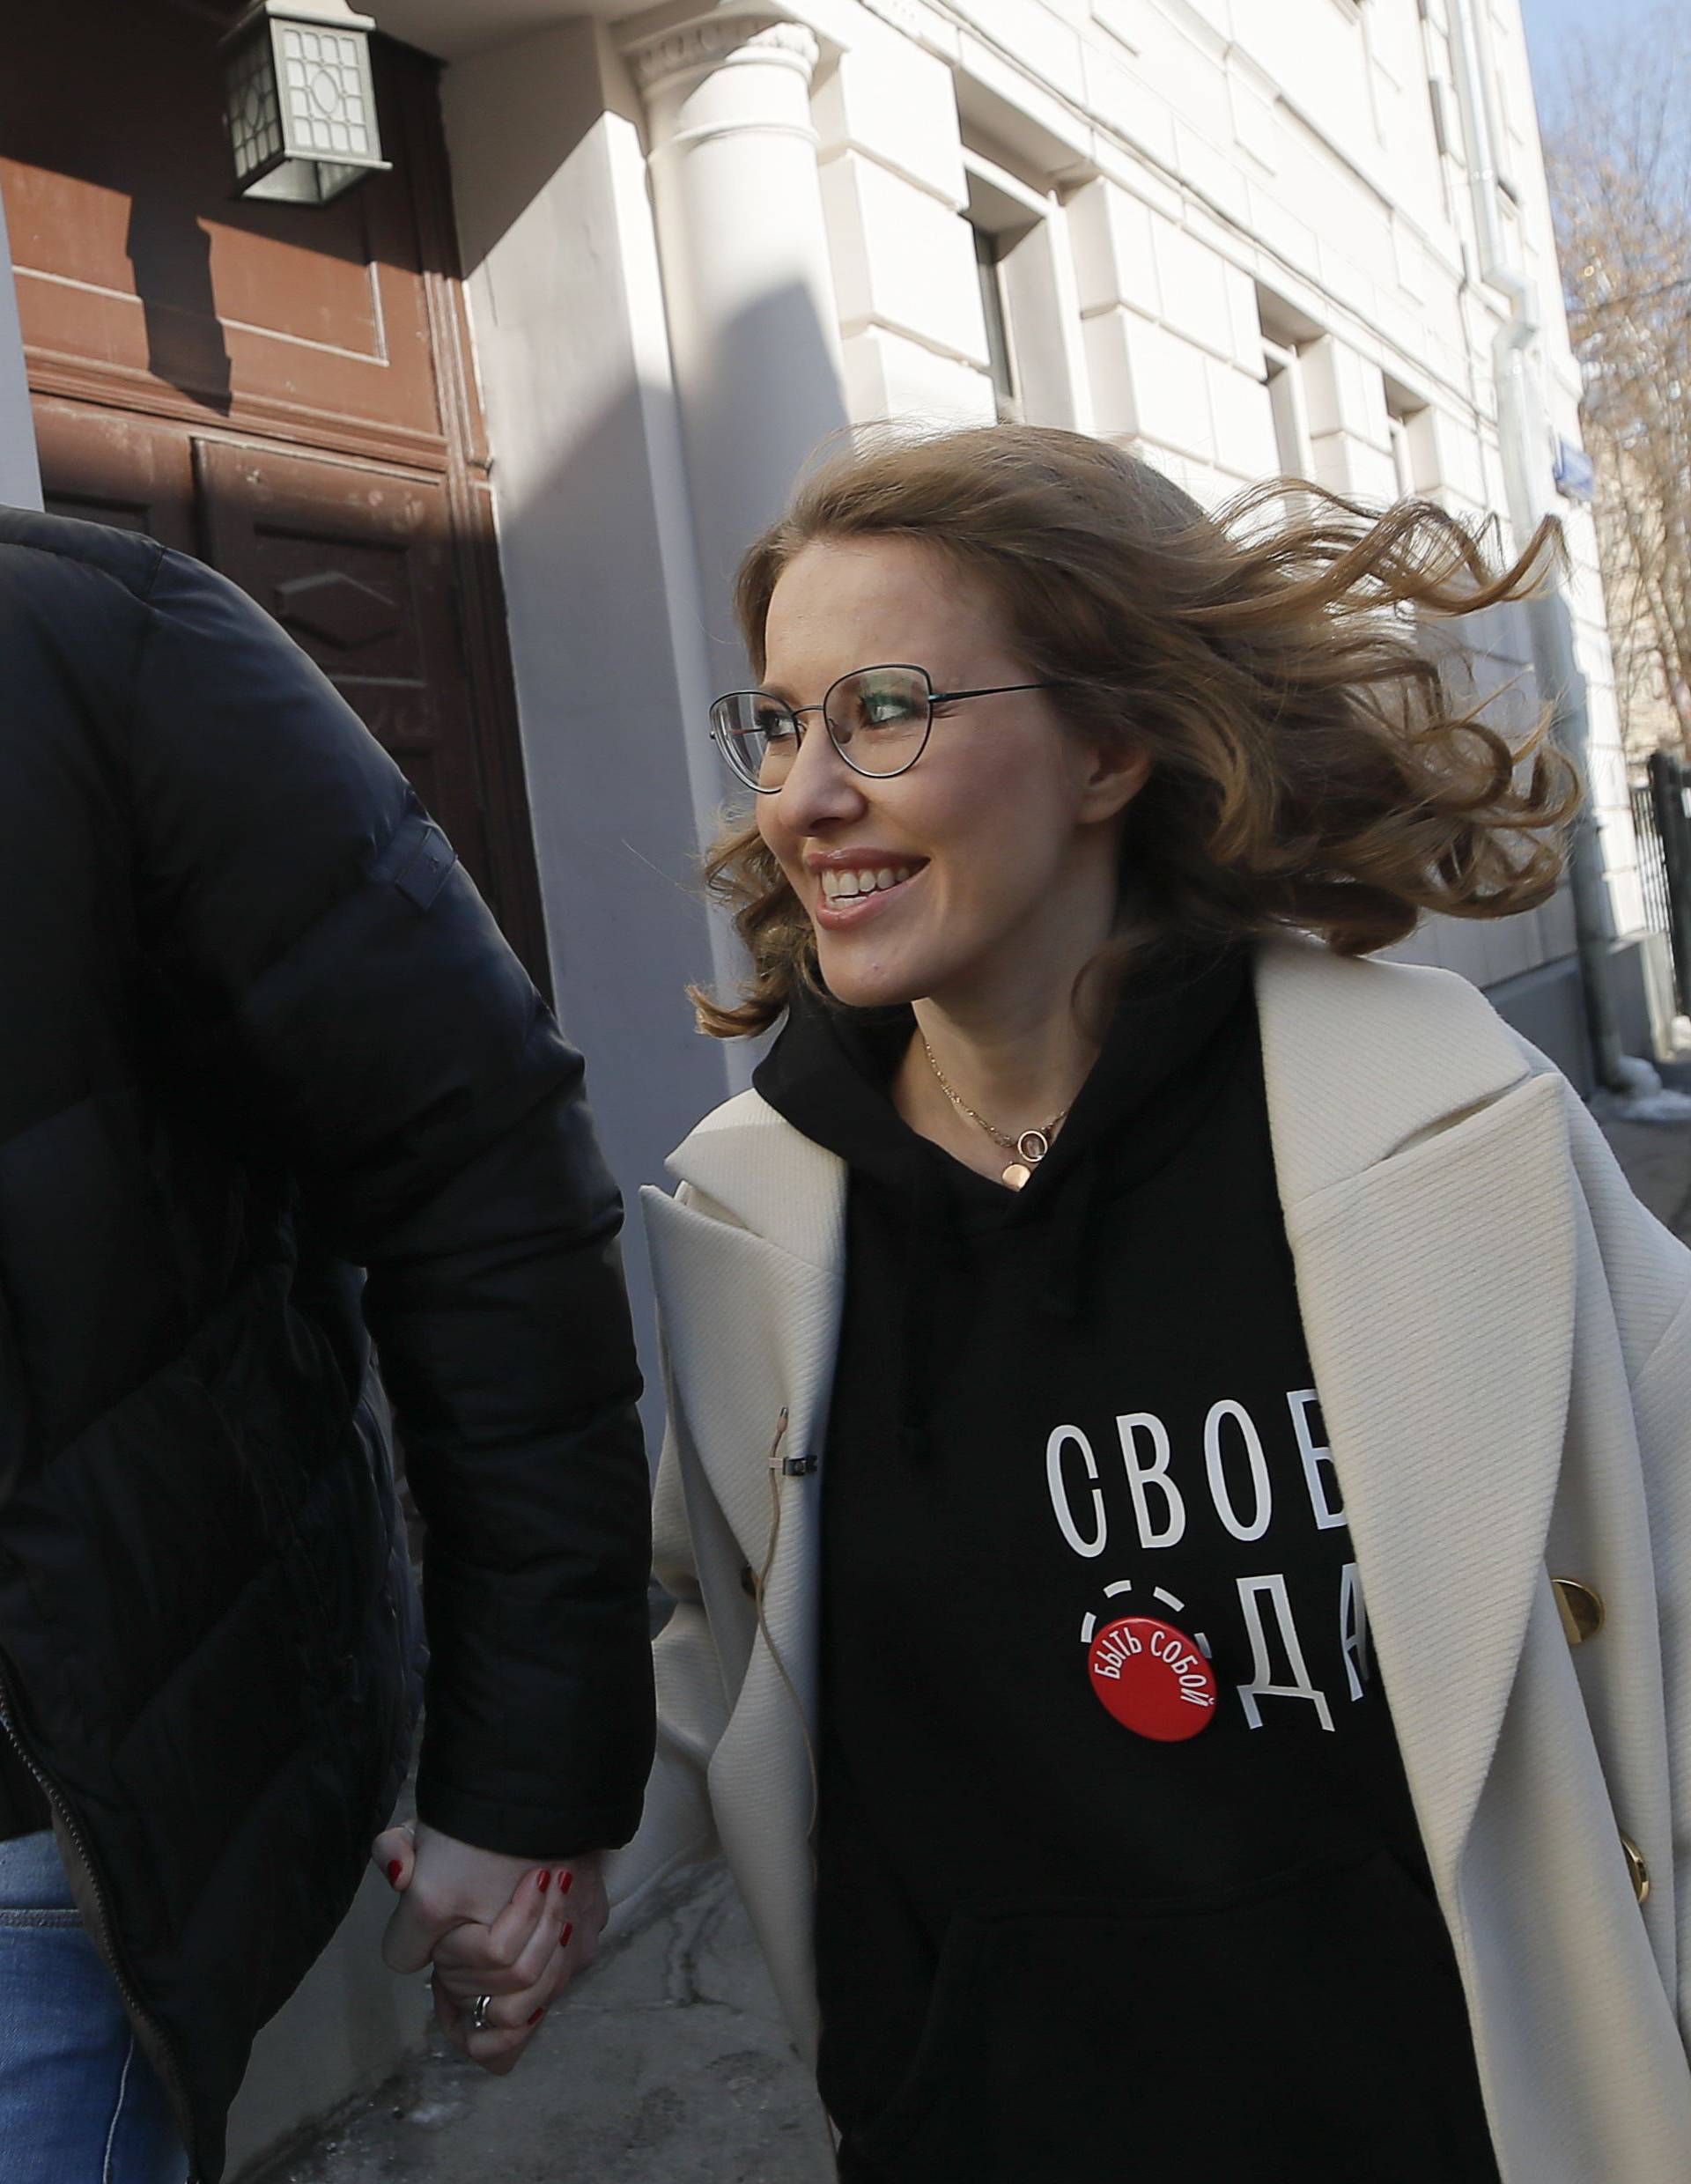 Presidential candidate Sobchak and her husband Vitorgan walk after visiting a polling station during the presidential election in Moscow